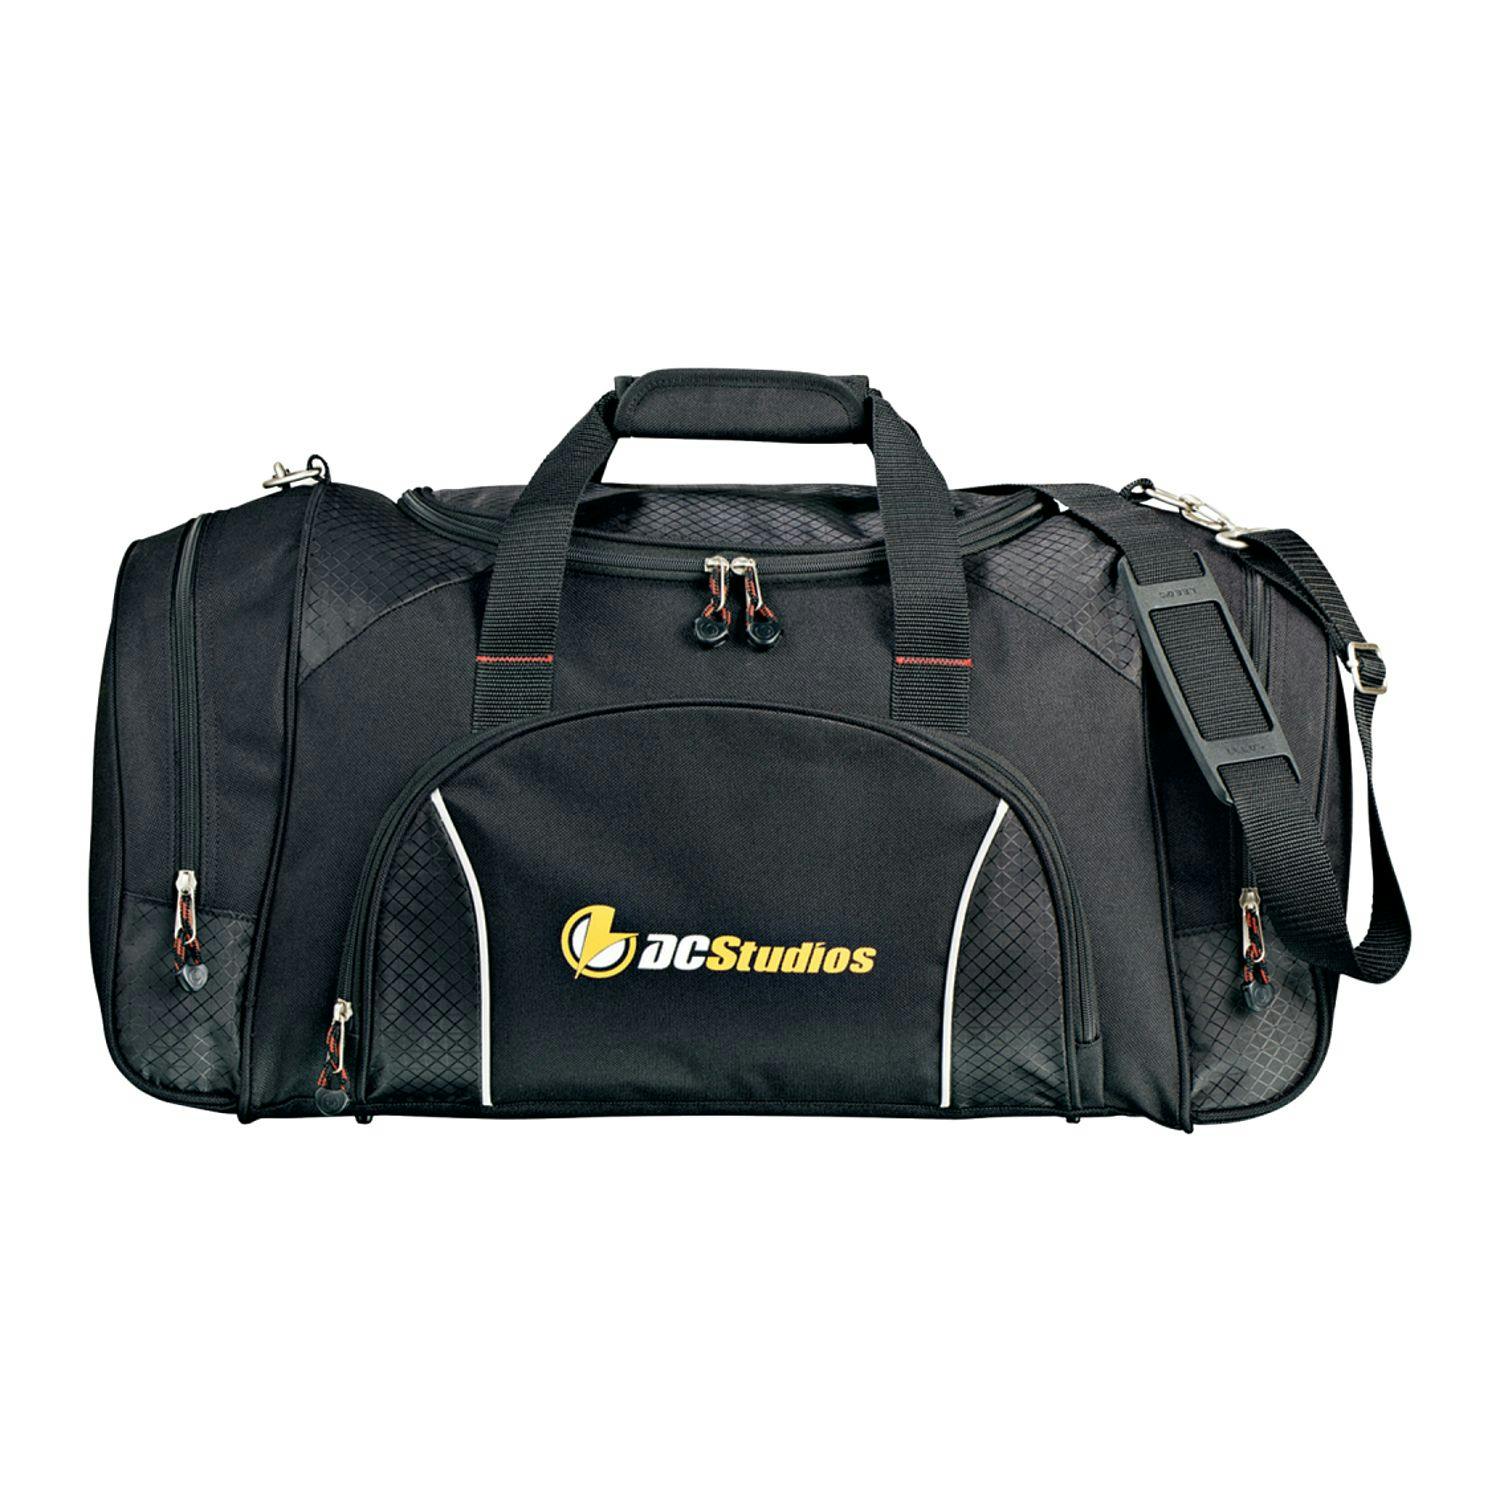 Triton Weekender 24" Carry-All Duffel Bag - additional Image 2